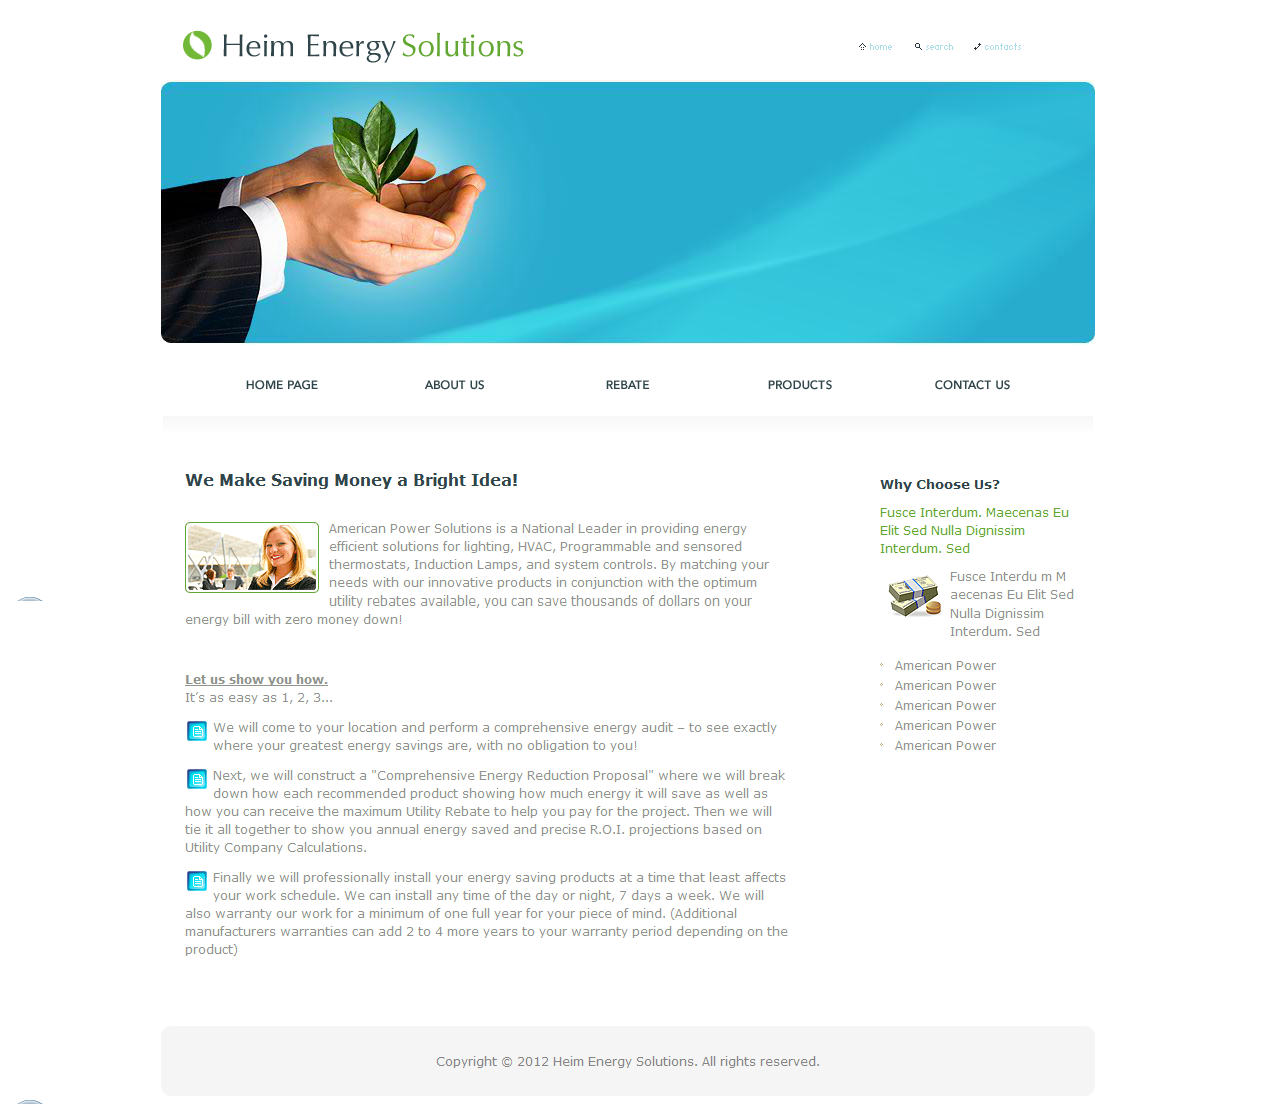 FireShot Screen Capture #031 - 'Heim Energy Solutions } Page } We Make Saving Money a Bright Idea!' - heimenergy_bkihost2_com_bbs_board_php_bo_table=page&wr_id=1.png